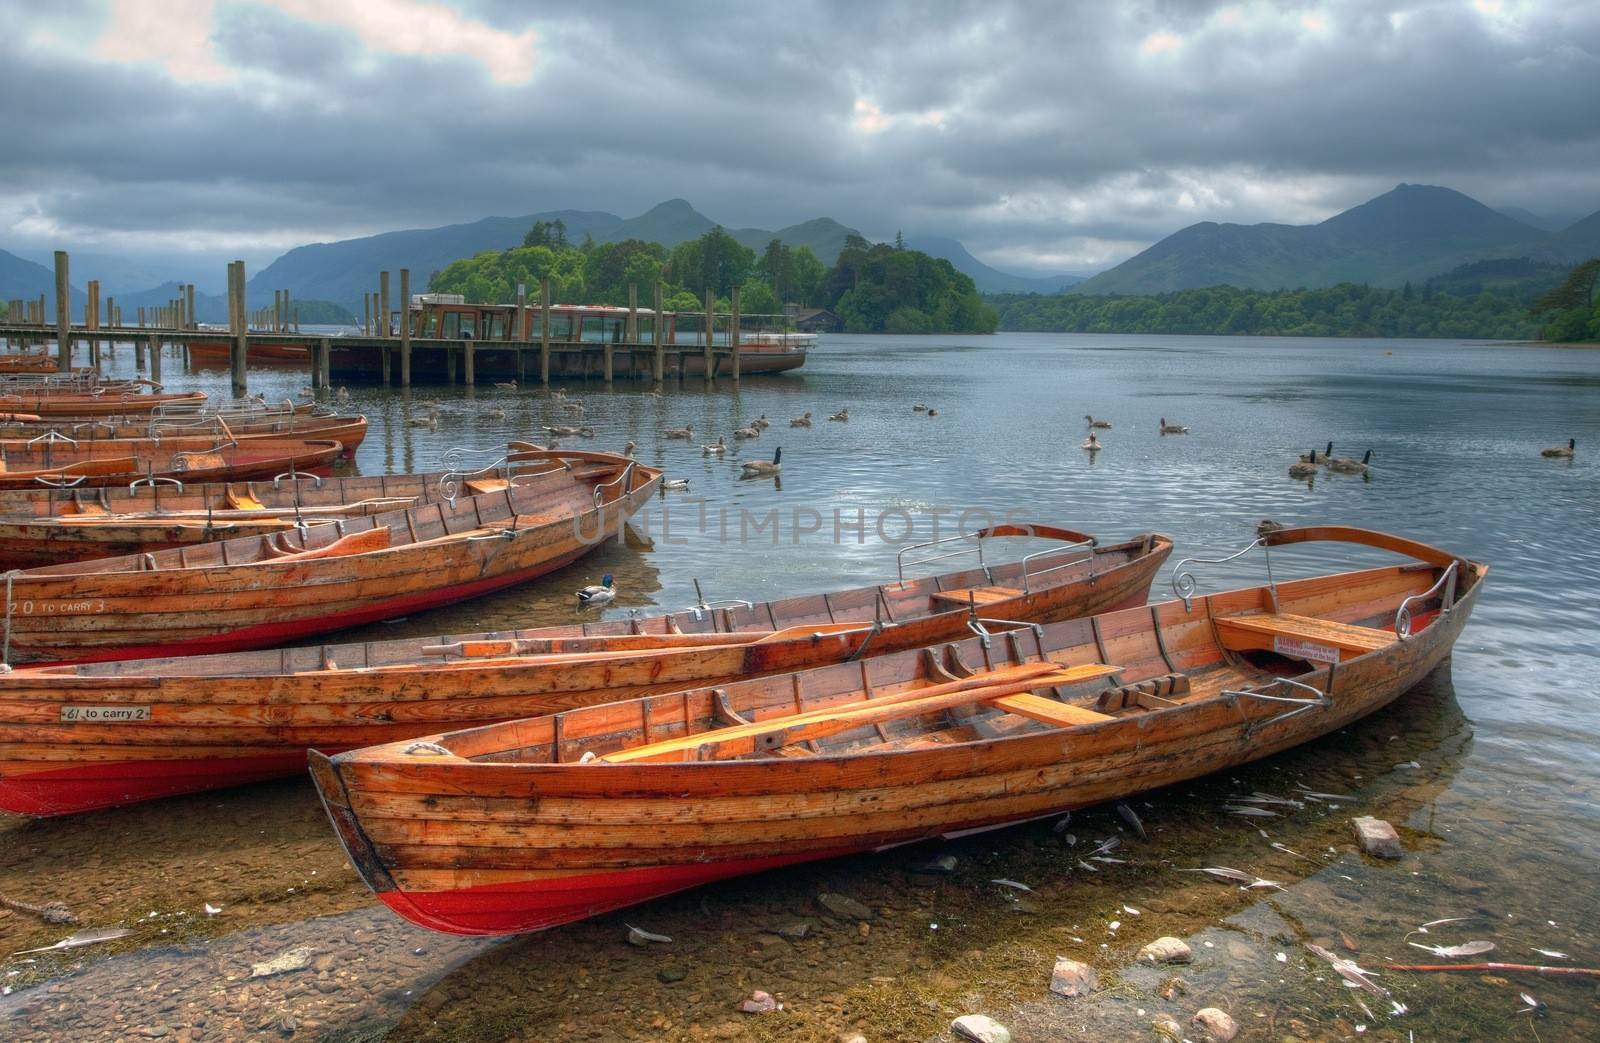 Rowing boats on Derwent Water, Keswick, the Lake District, Cumbria, England.